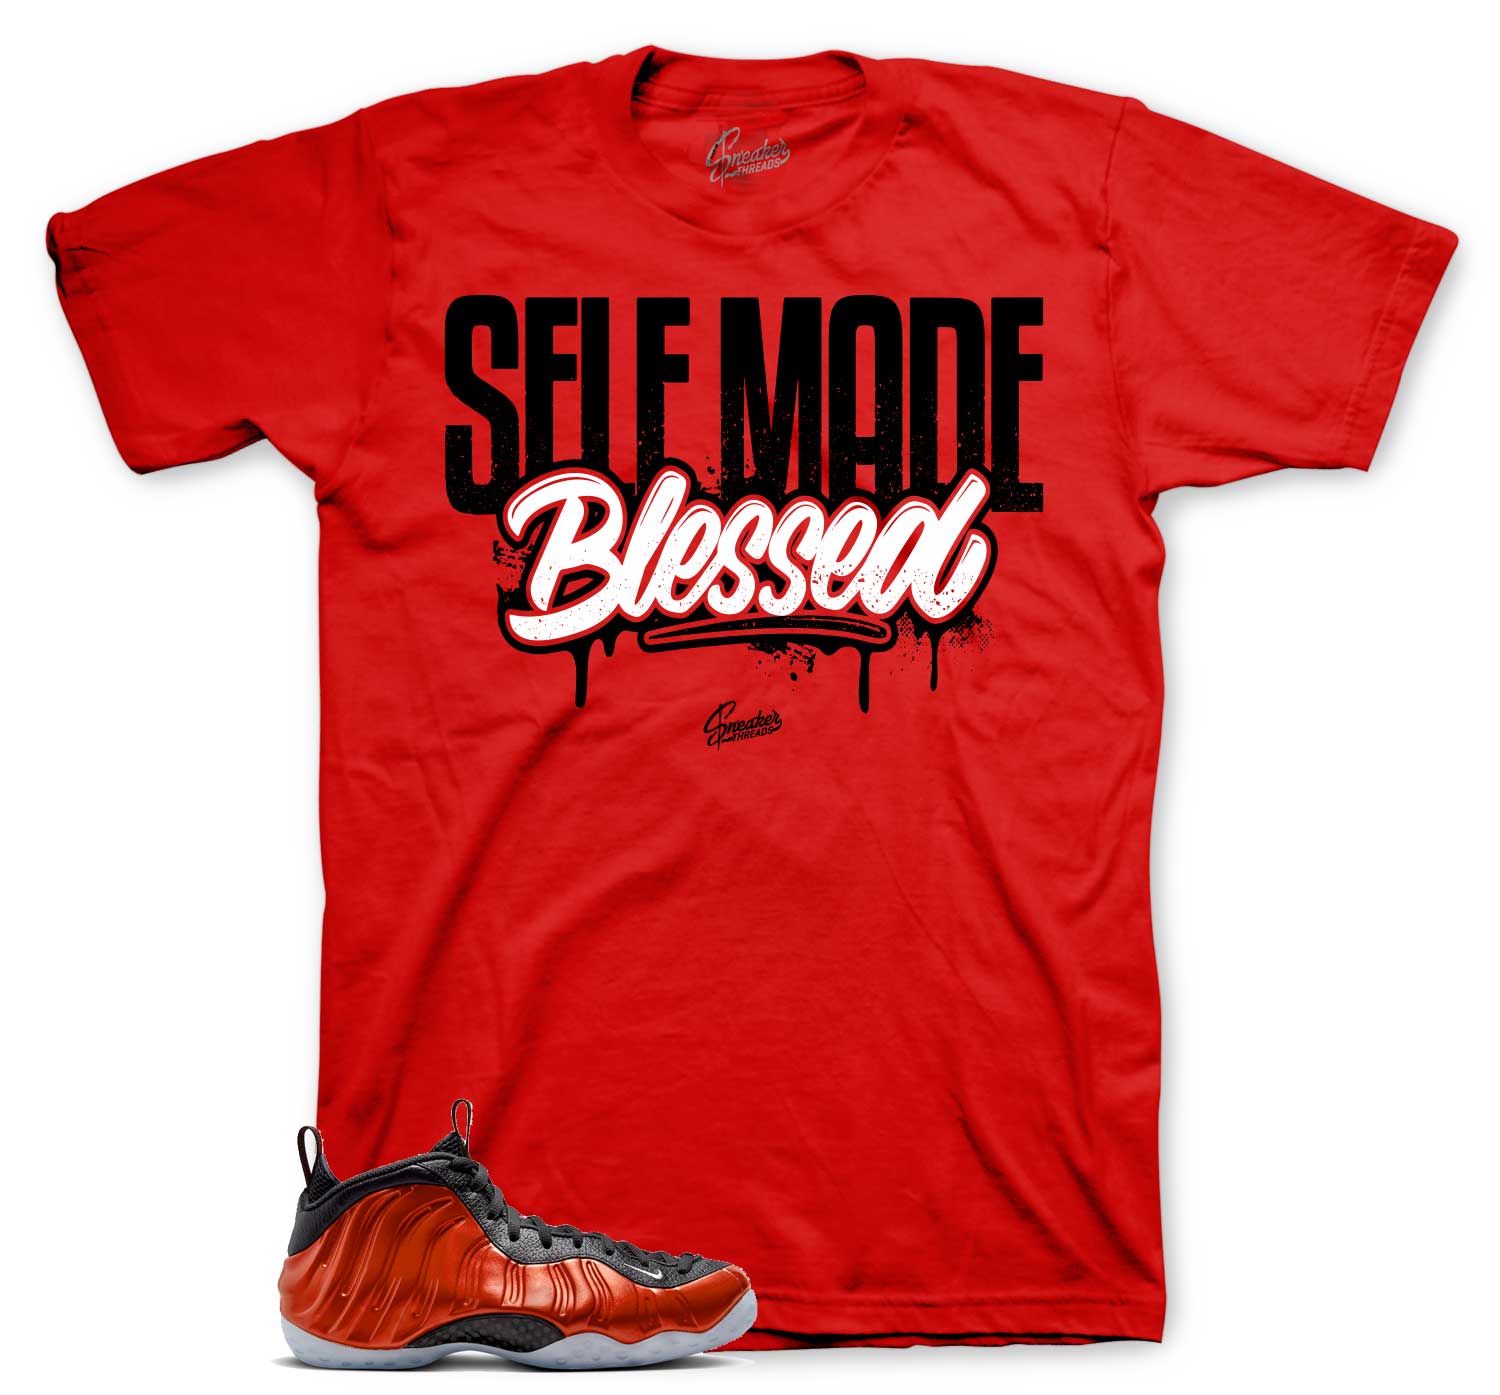 Foamposite Metallic red Tees & sneaker outfits | self made Shirt